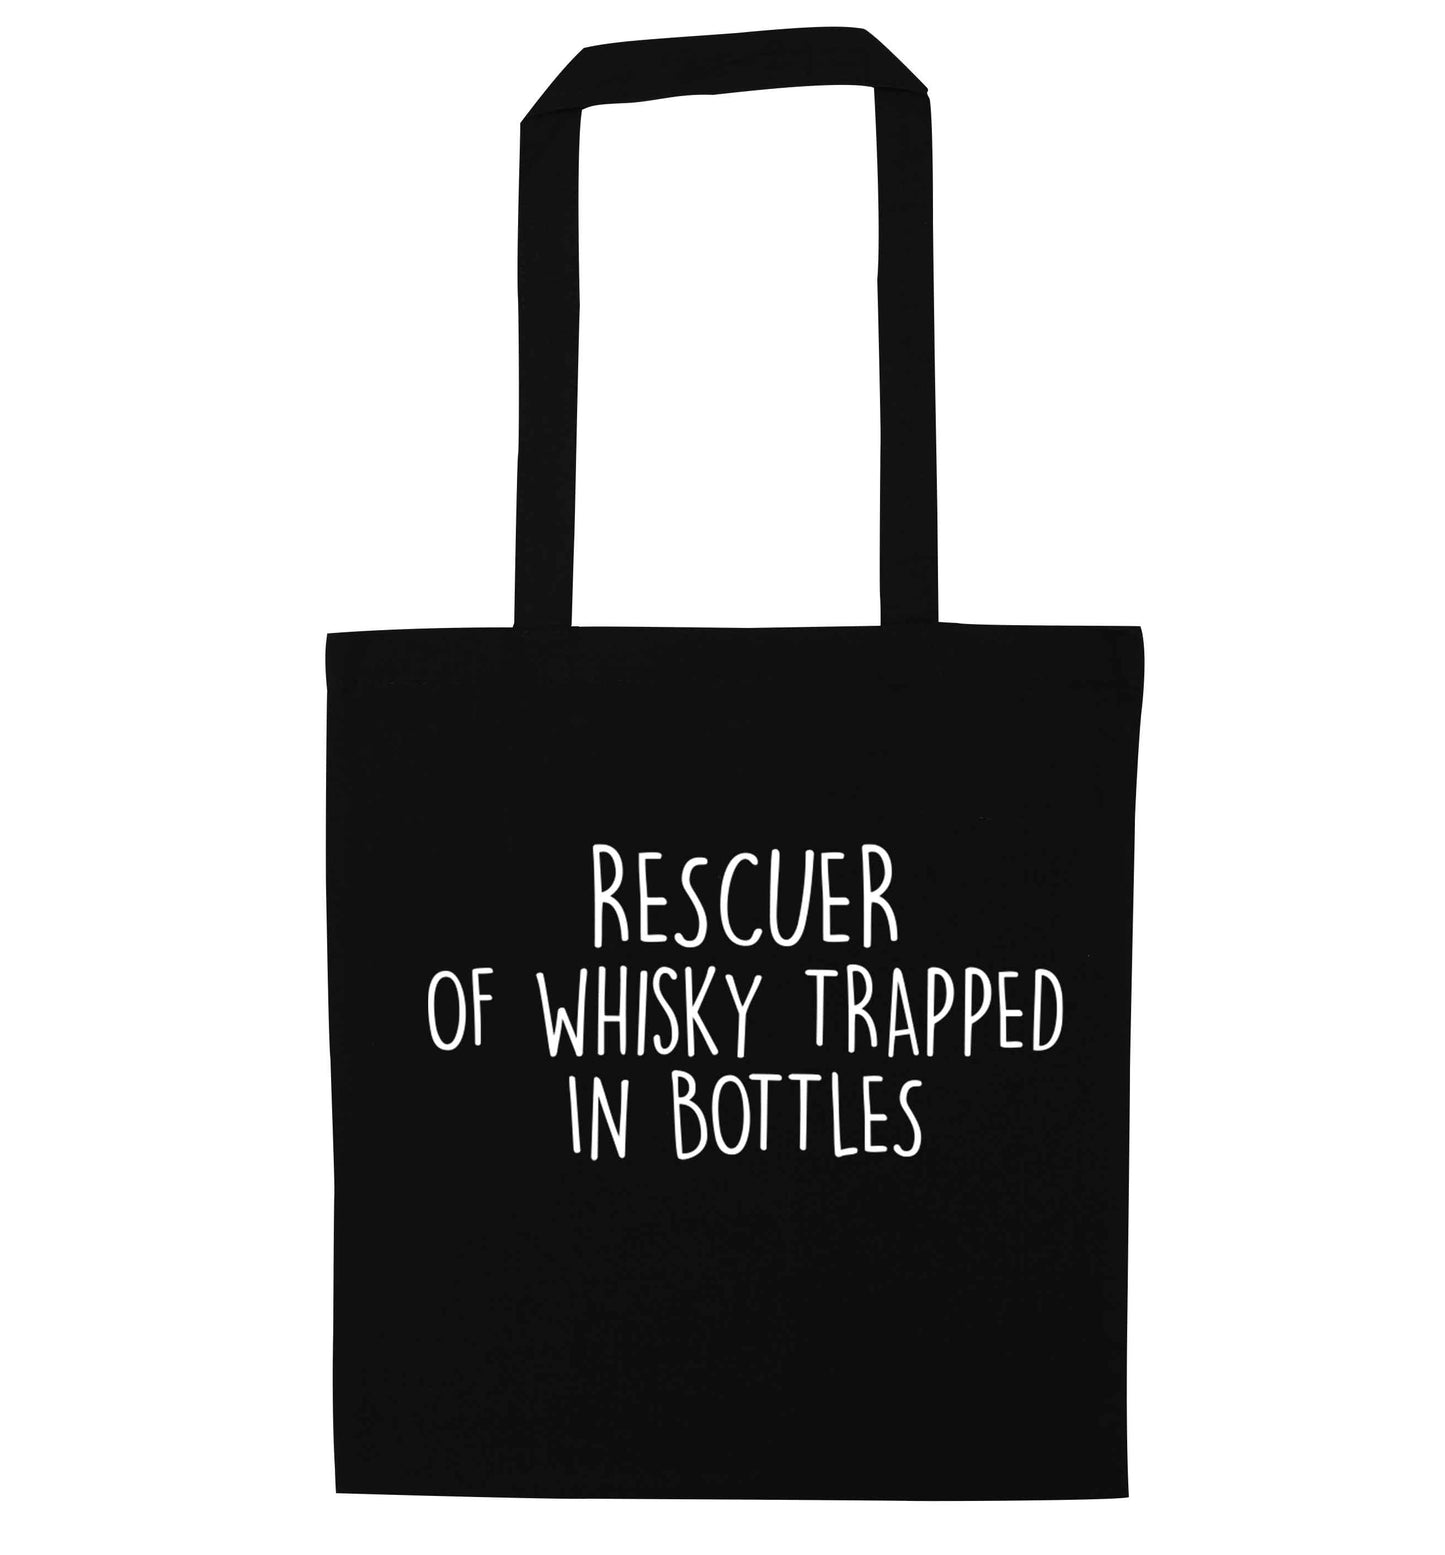 Rescuer of whisky trapped in bottles black tote bag